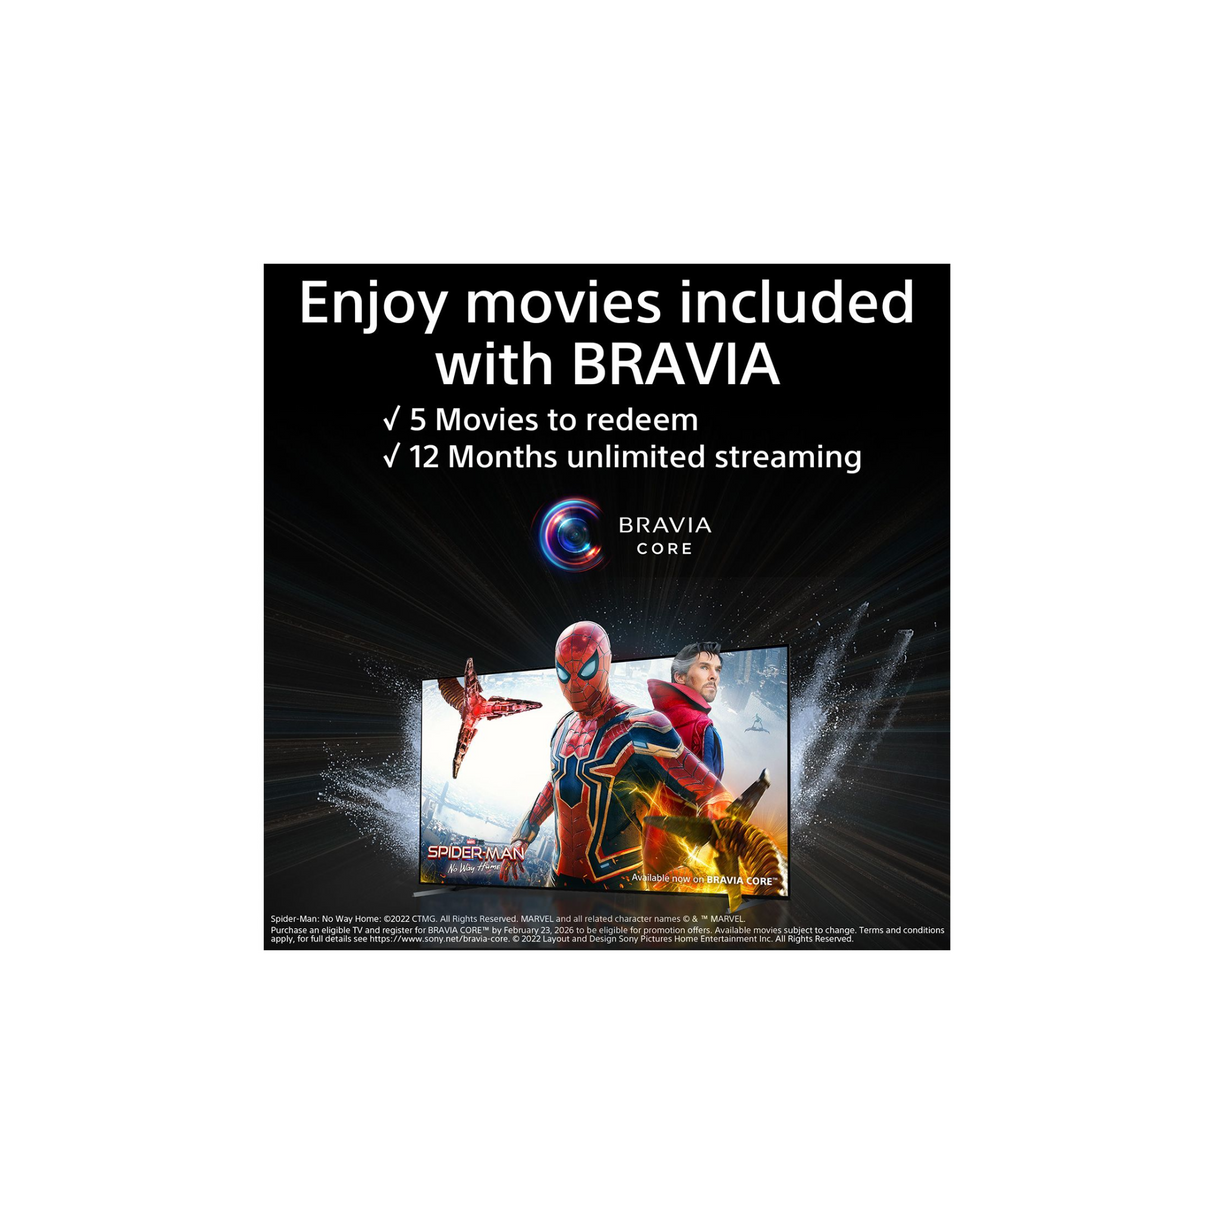 SONY BRAVIA KD65X75WL 65 inch 4K Ultra HD HDR Smart LED TV With Google Assistant